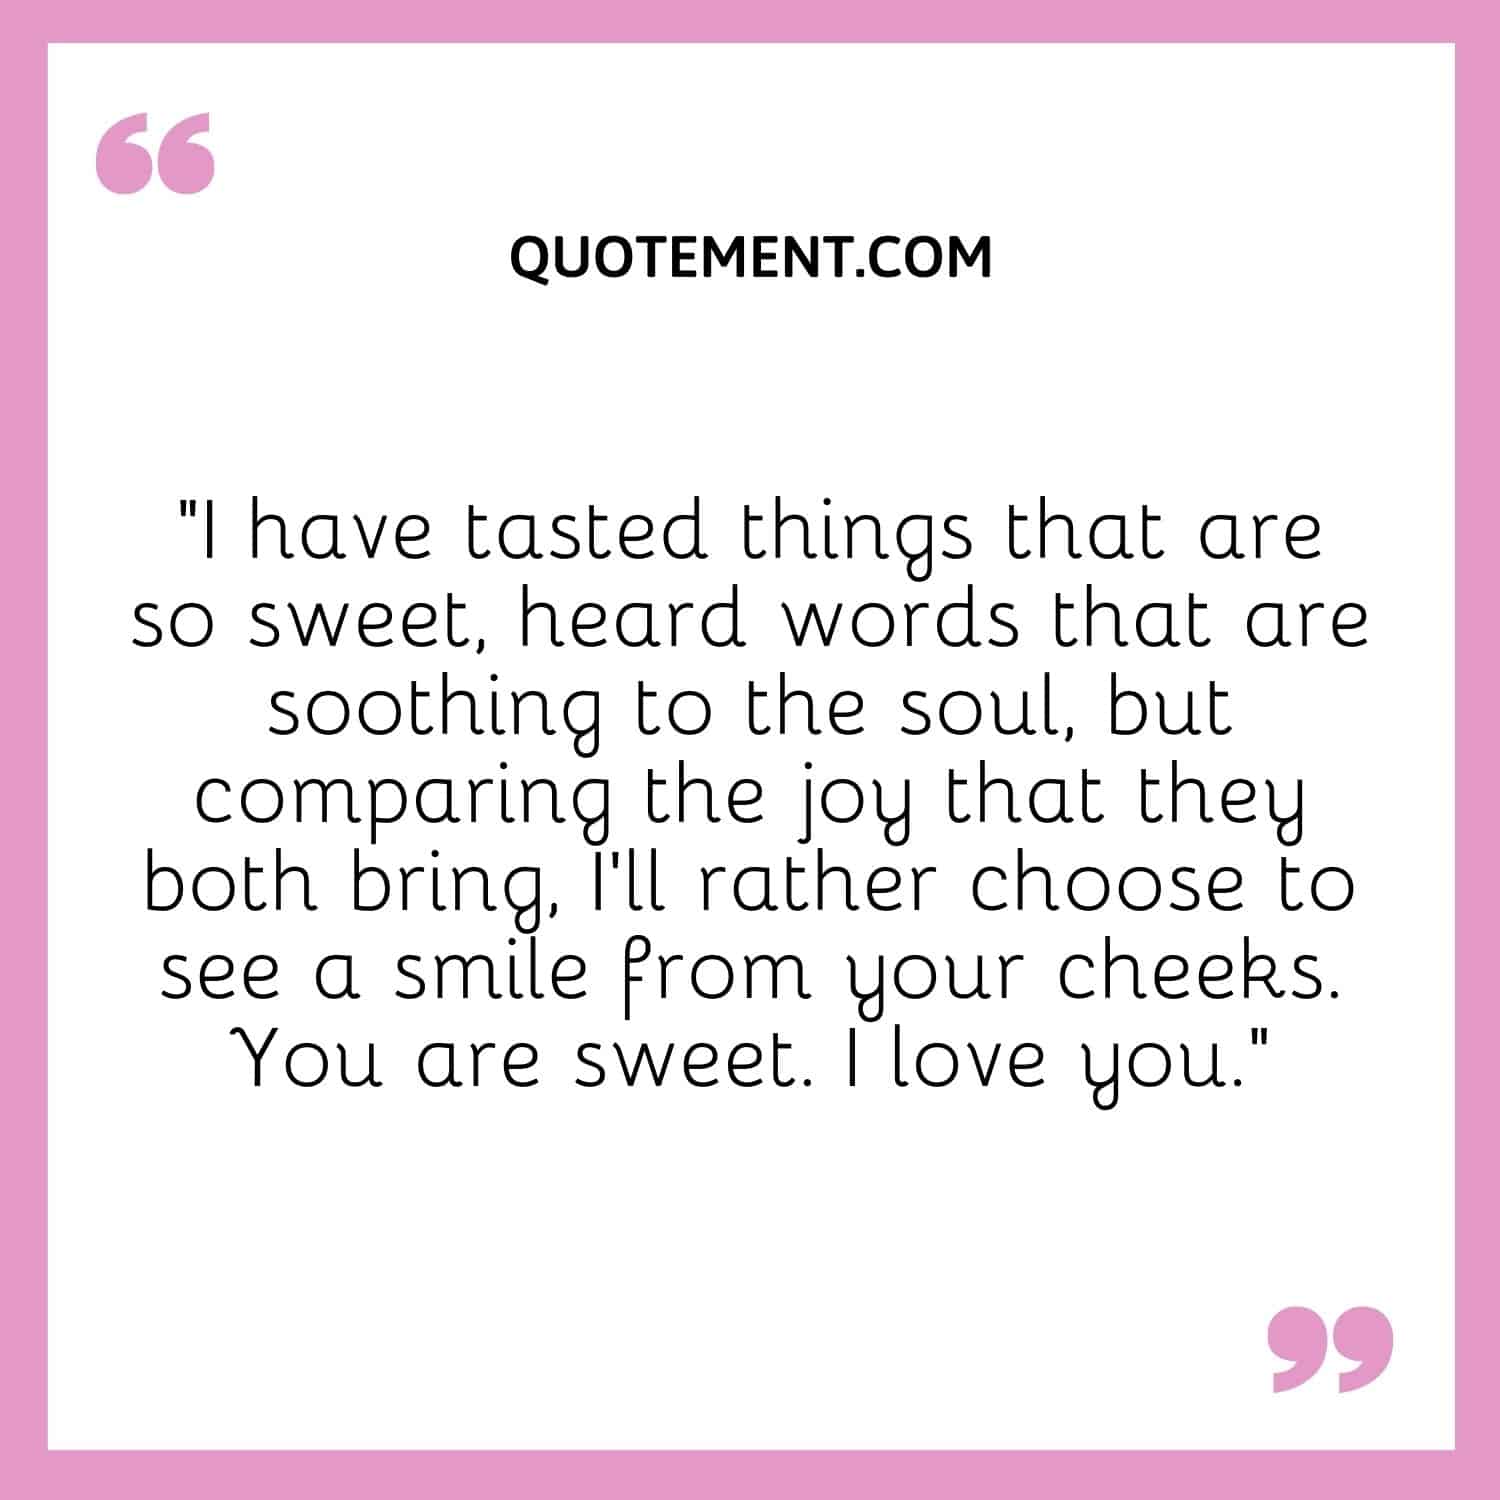 I have tasted things that are so sweet, heard words that are soothing to the soul, but comparing the joy that they both bring, I'll rather choose to see a smile from your cheeks. You are sweet. I love you.